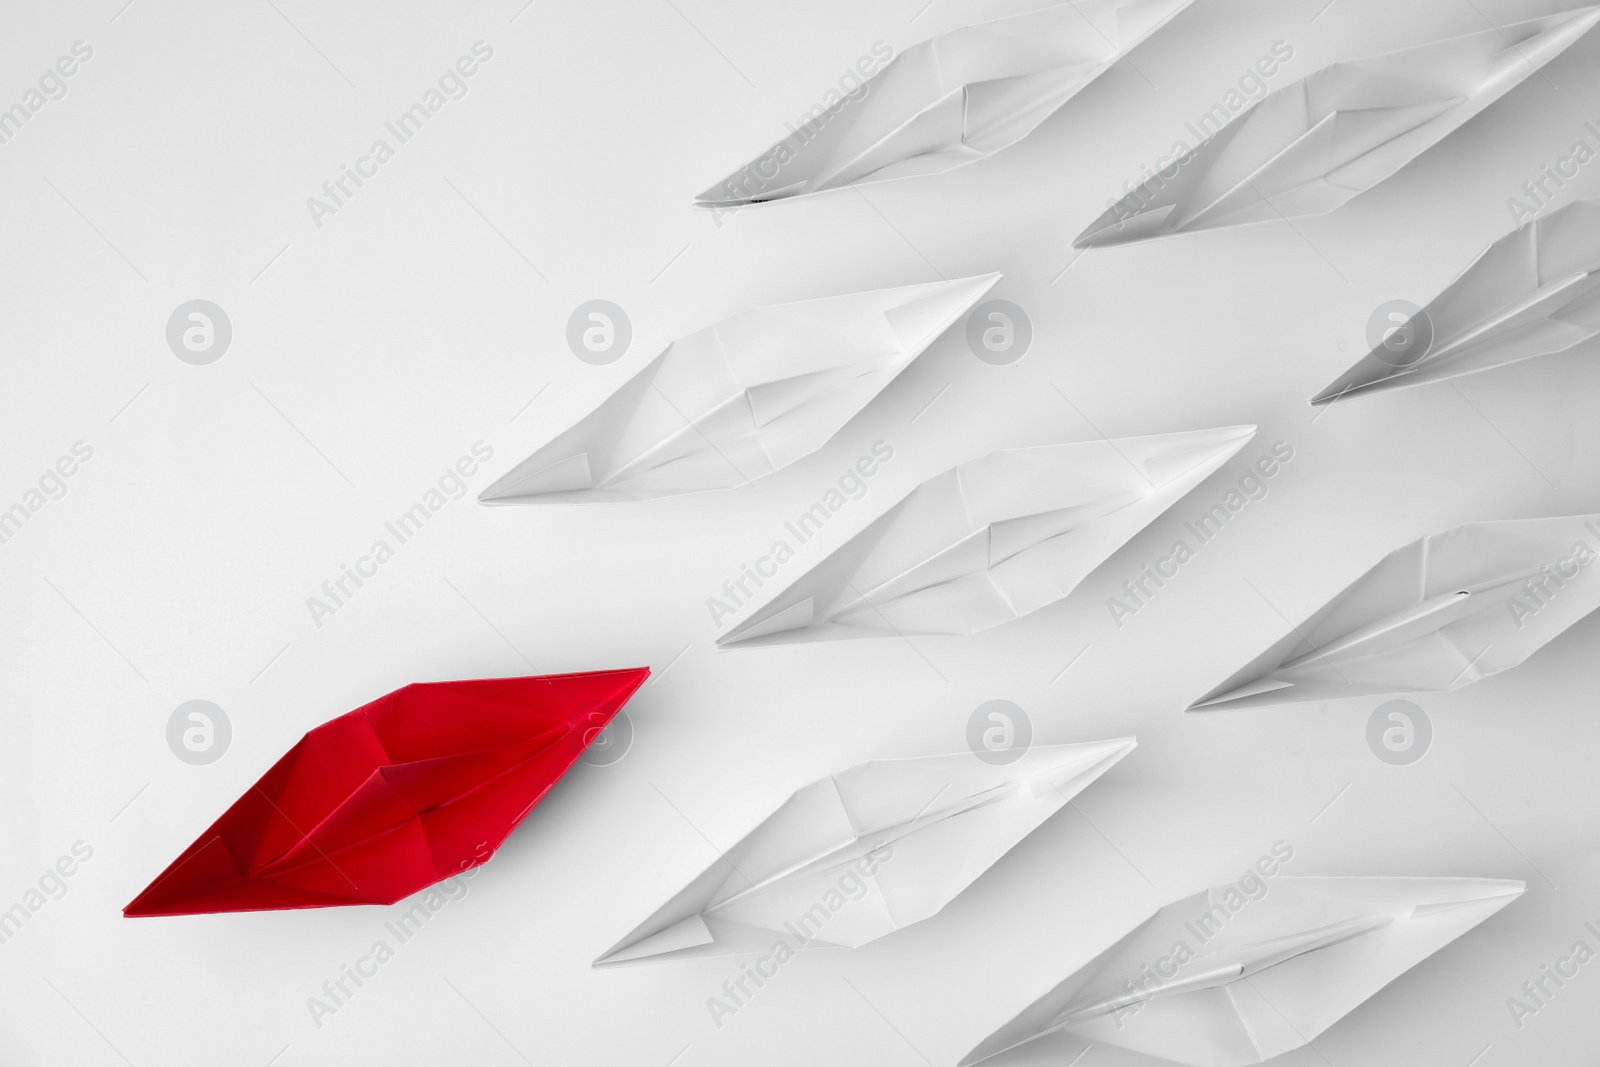 Photo of Group of paper boats following red one on white background, flat lay. Leadership concept